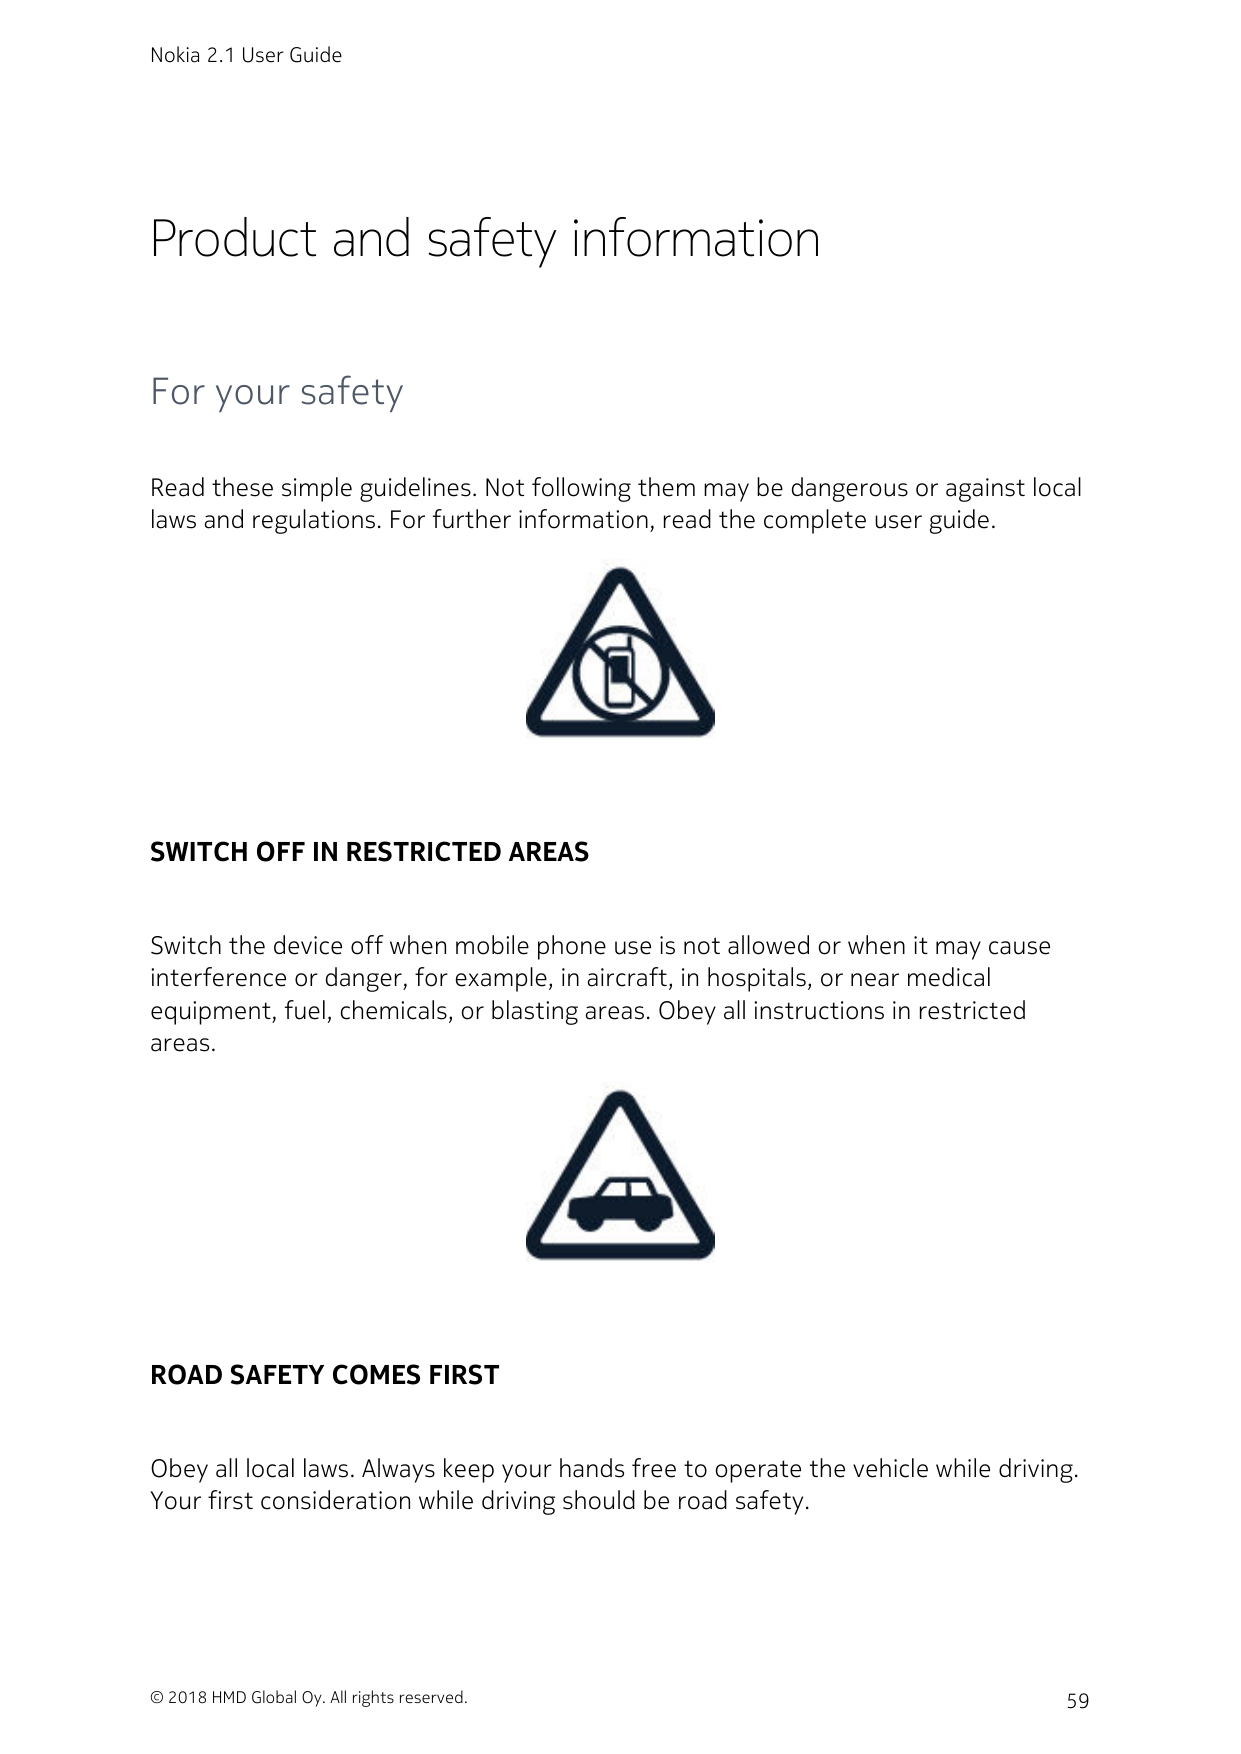 Nokia 2.1 User GuideProduct and safety informationFor your safetyRead these simple guidelines. Not following them may be dangero